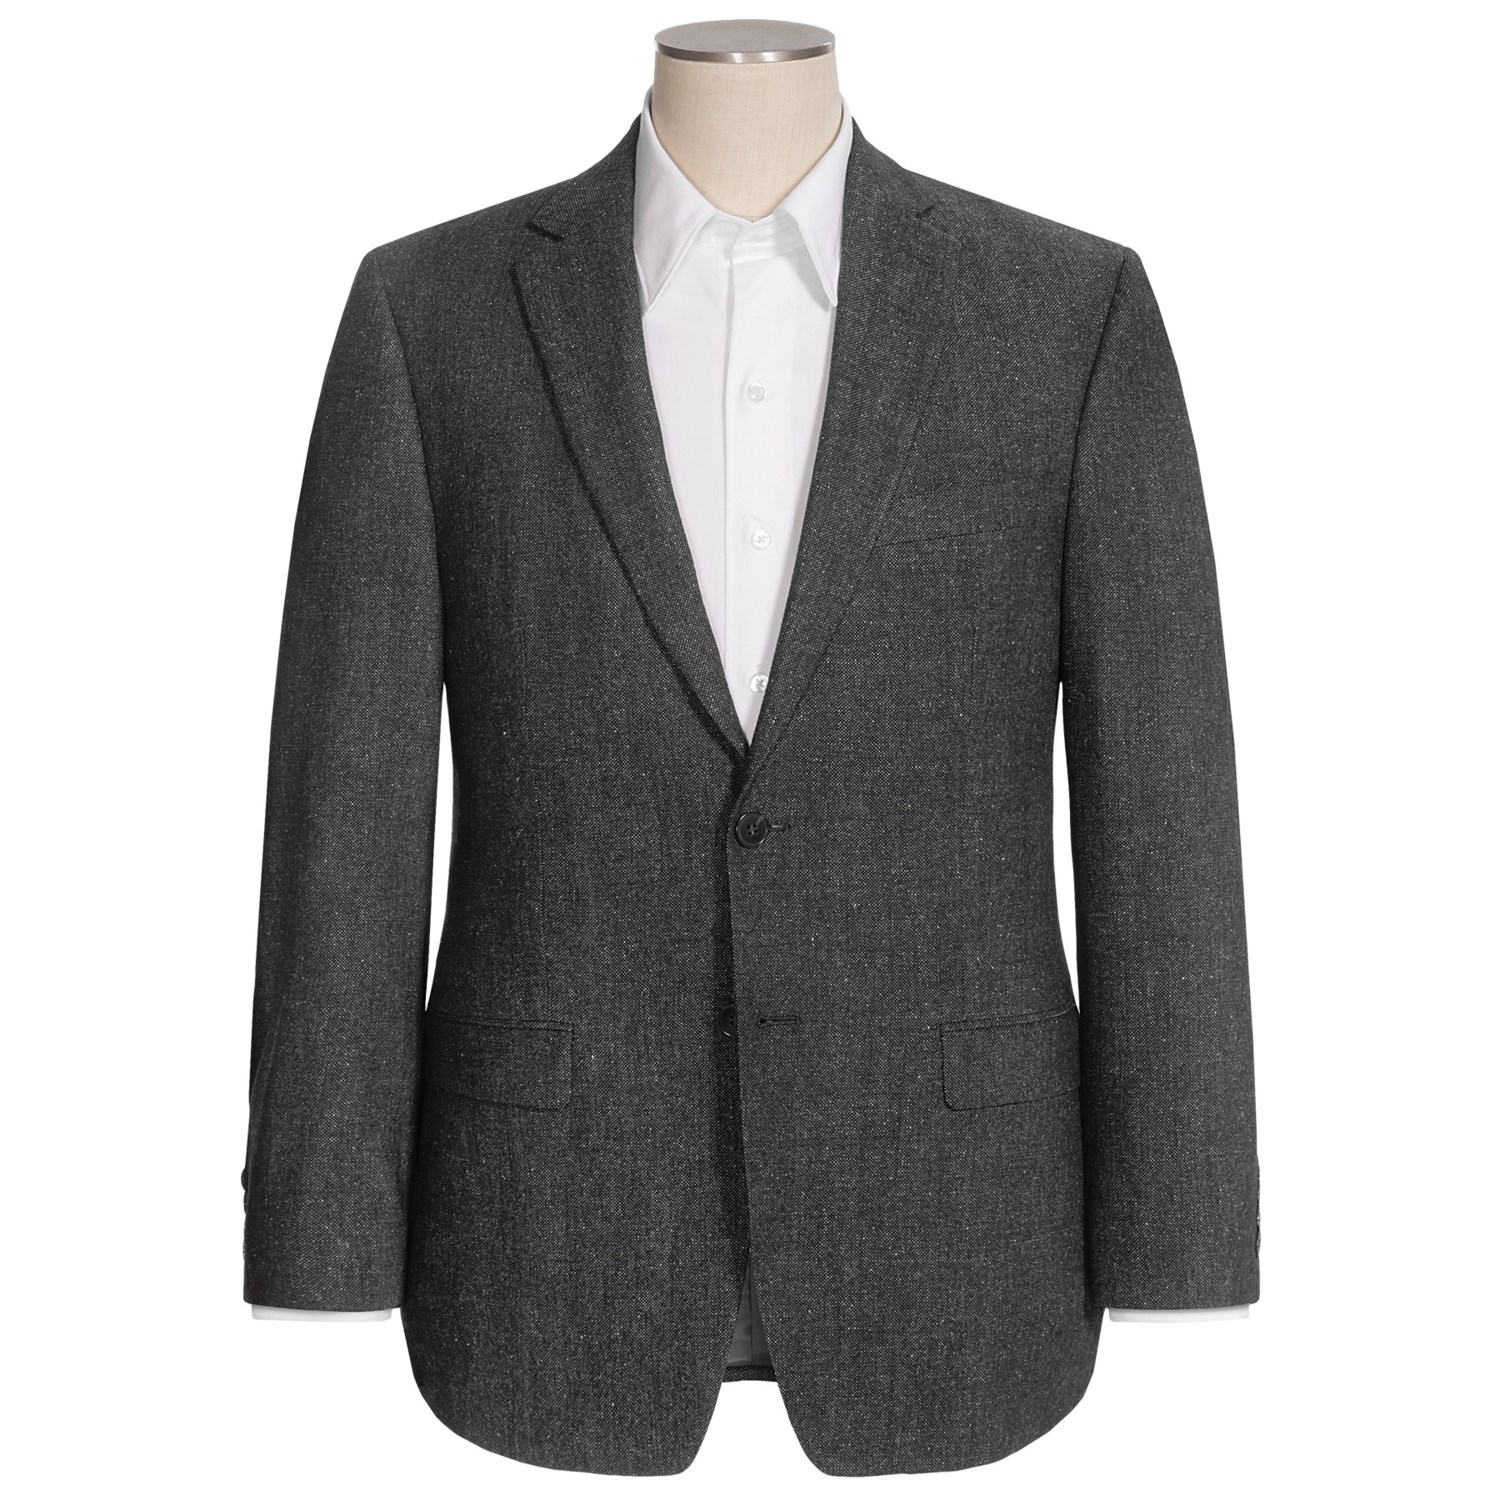 Calvin Klein Donegal Tweed Sport Coat - Elbow Patches, Wool Blend (For ...